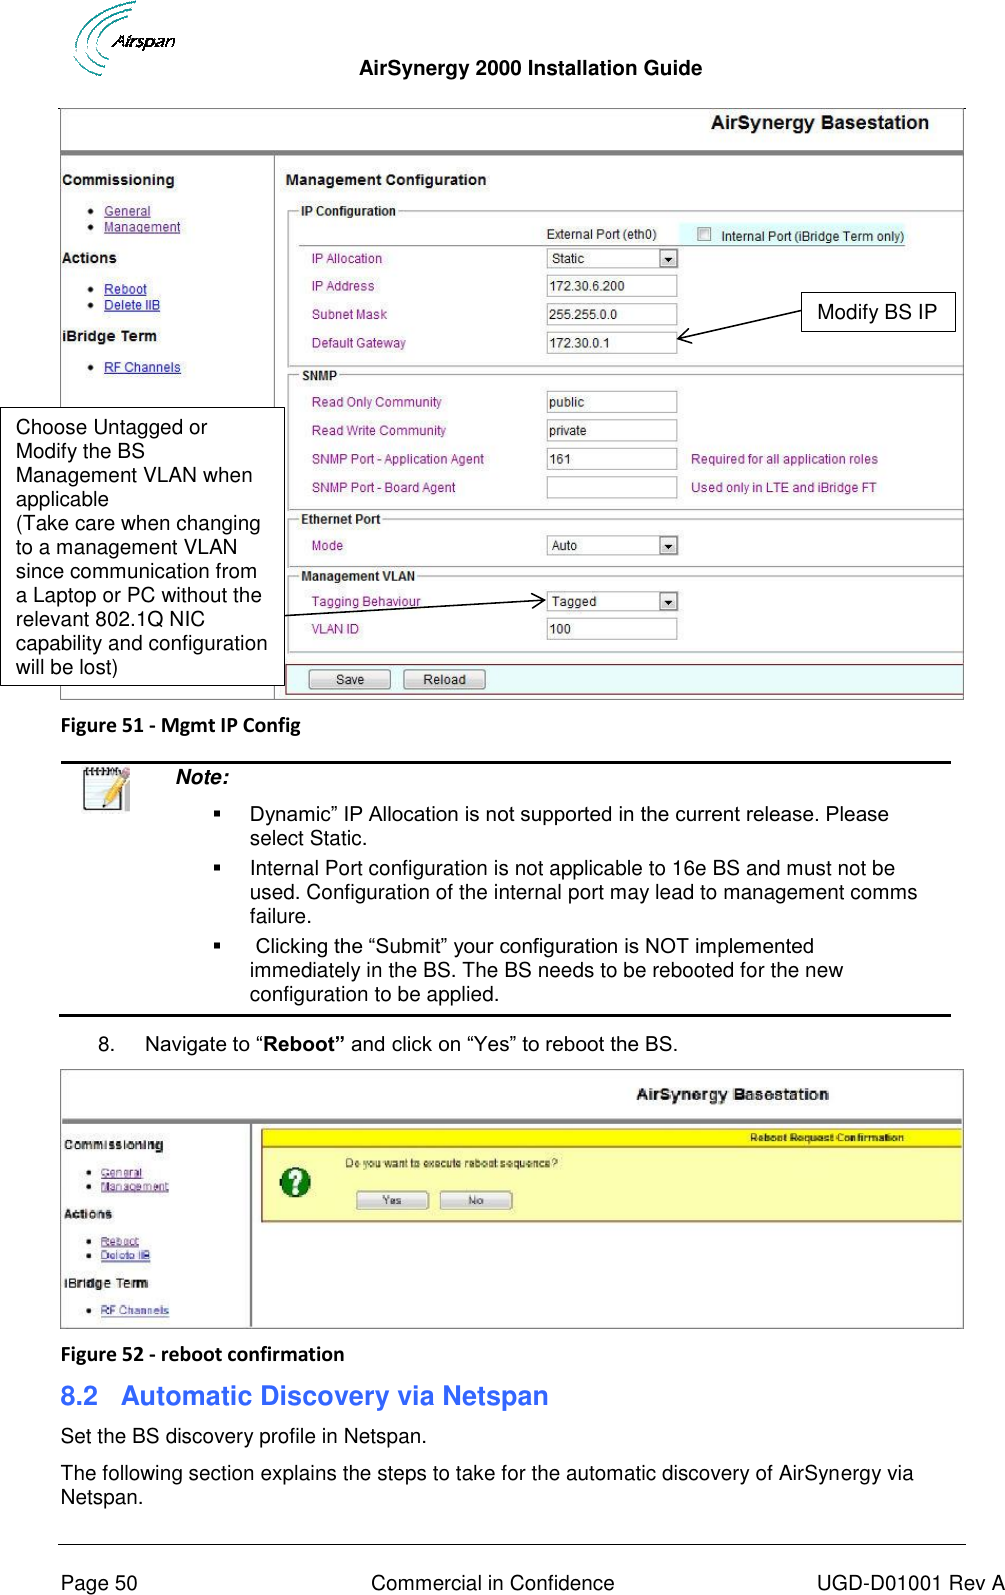  AirSynergy 2000 Installation Guide     Page 50  Commercial in Confidence  UGD-D01001 Rev A  Figure 51 - Mgmt IP Config    Note:   Dynamic” IP Allocation is not supported in the current release. Please select Static.   Internal Port configuration is not applicable to 16e BS and must not be used. Configuration of the internal port may lead to management comms failure.     Clicking the “Submit” your configuration is NOT implemented immediately in the BS. The BS needs to be rebooted for the new configuration to be applied.   8. Navigate to “Reboot” and click on “Yes” to reboot the BS.   Figure 52 - reboot confirmation 8.2  Automatic Discovery via Netspan Set the BS discovery profile in Netspan. The following section explains the steps to take for the automatic discovery of AirSynergy via Netspan. Modify BS IP Choose Untagged or Modify the BS Management VLAN when applicable  (Take care when changing to a management VLAN since communication from a Laptop or PC without the relevant 802.1Q NIC capability and configuration will be lost) 